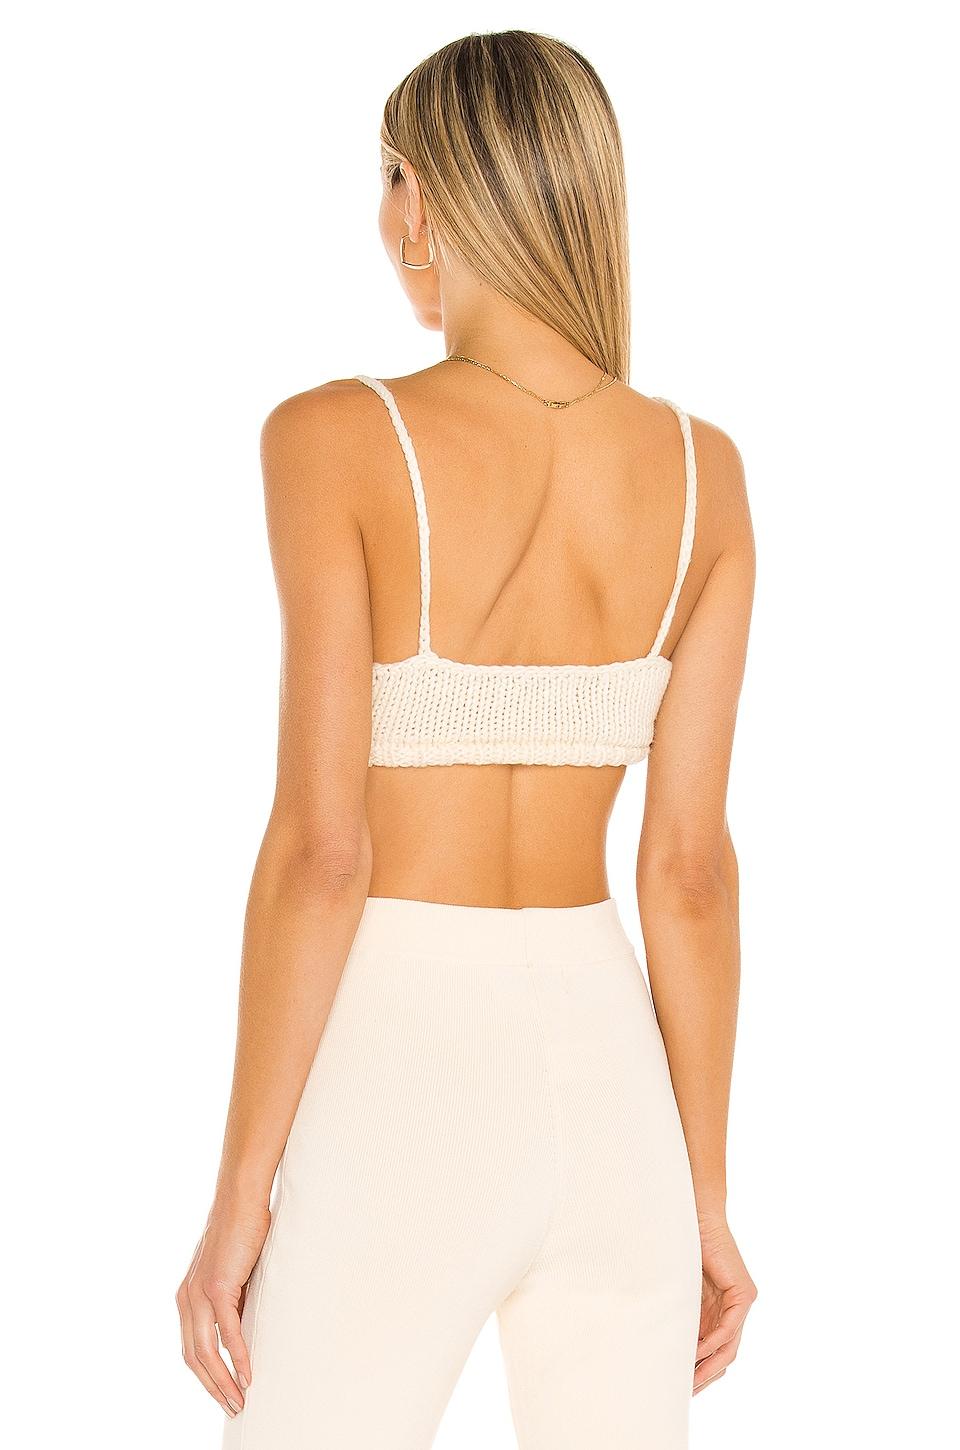 L'academie Cassia Knit Bralette in Natural | Lyst